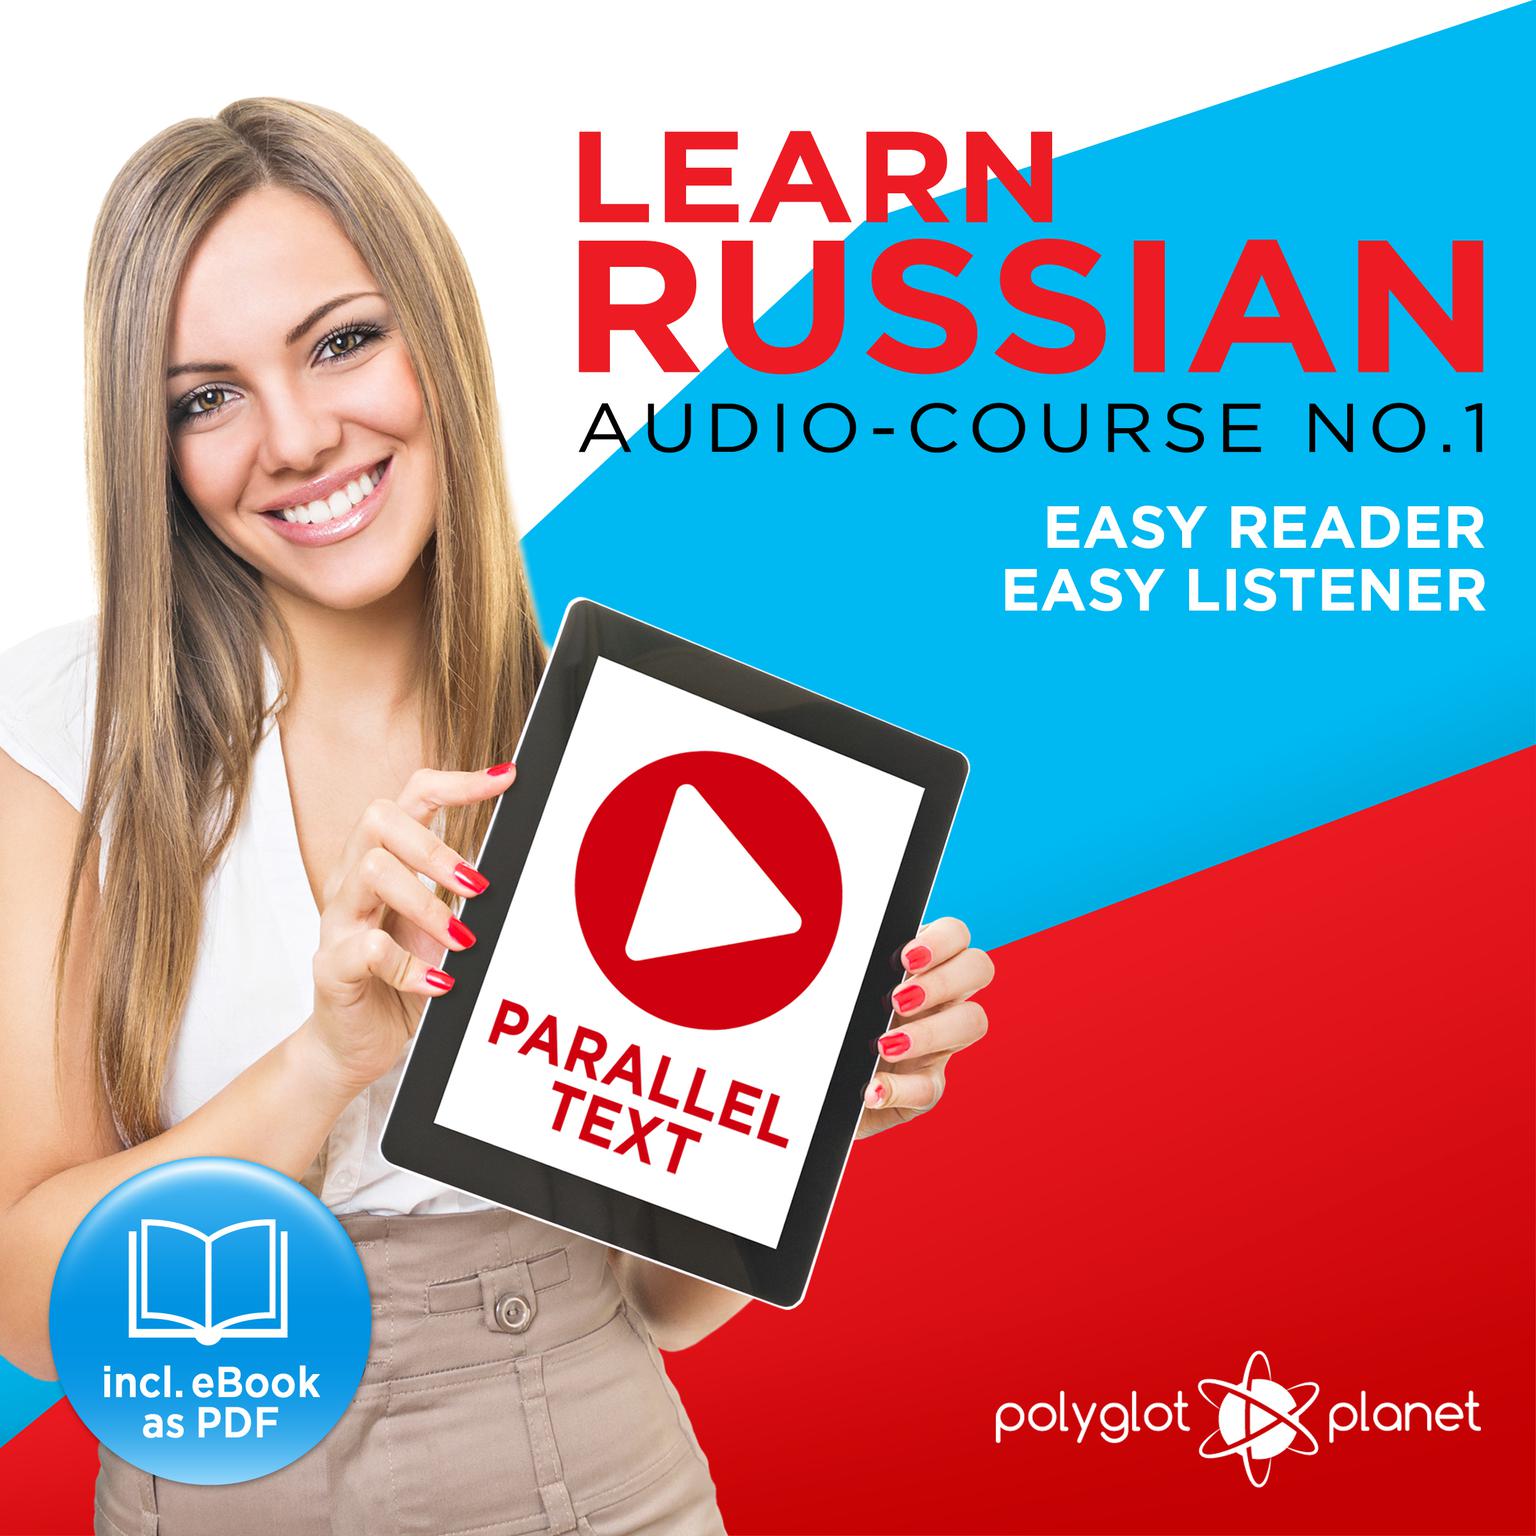 Learn Russian - Easy Reader - Easy Listener - Parallel Text Audio Course No. 1 - The Russian Easy Reader - Easy Audio Learning Course Audiobook, by Polyglot Planet